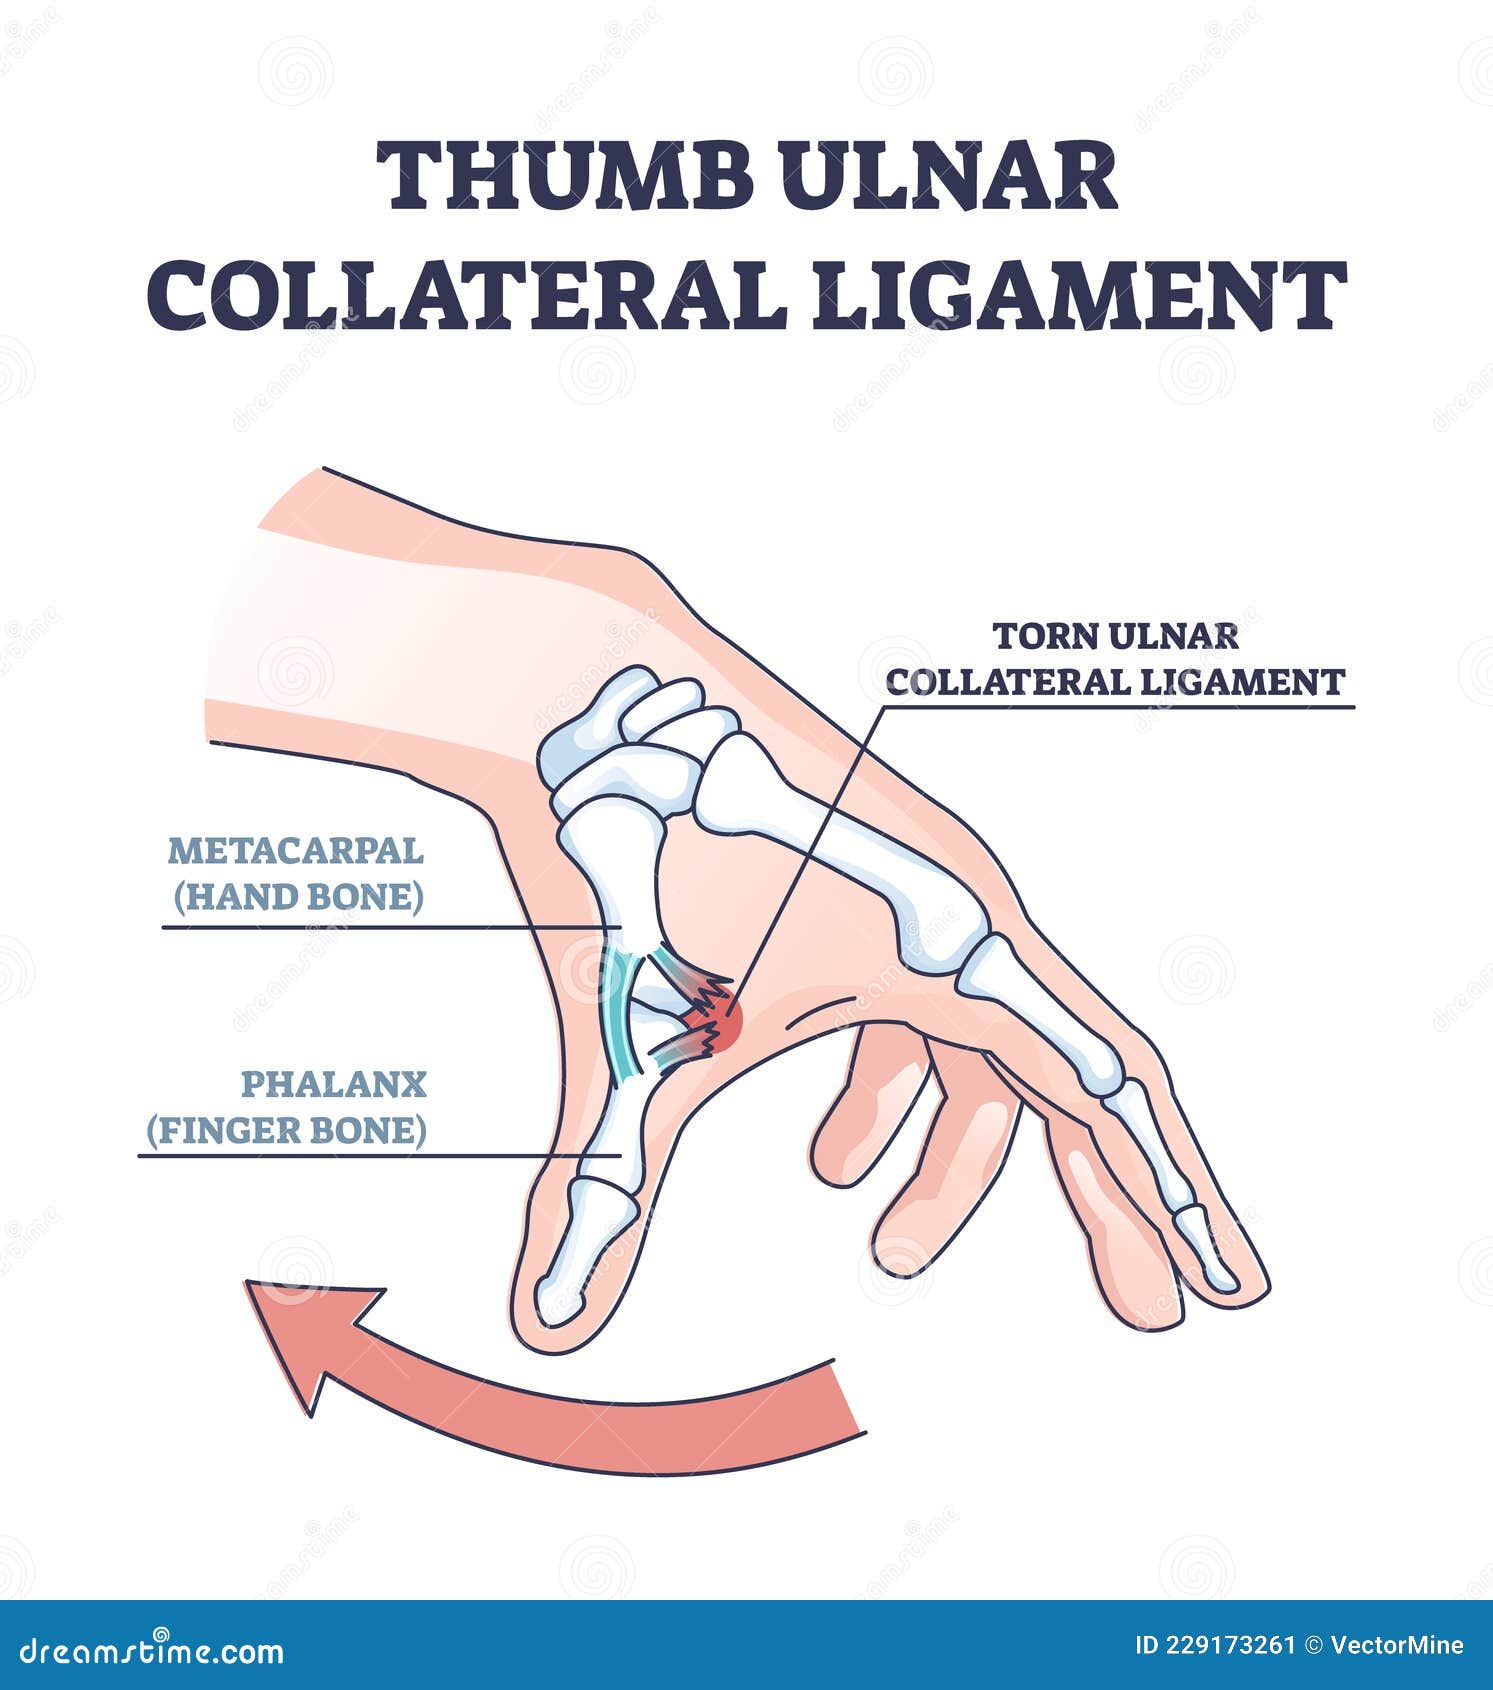 thumb ulnar collateral ligament as finger injury and problem outline diagram